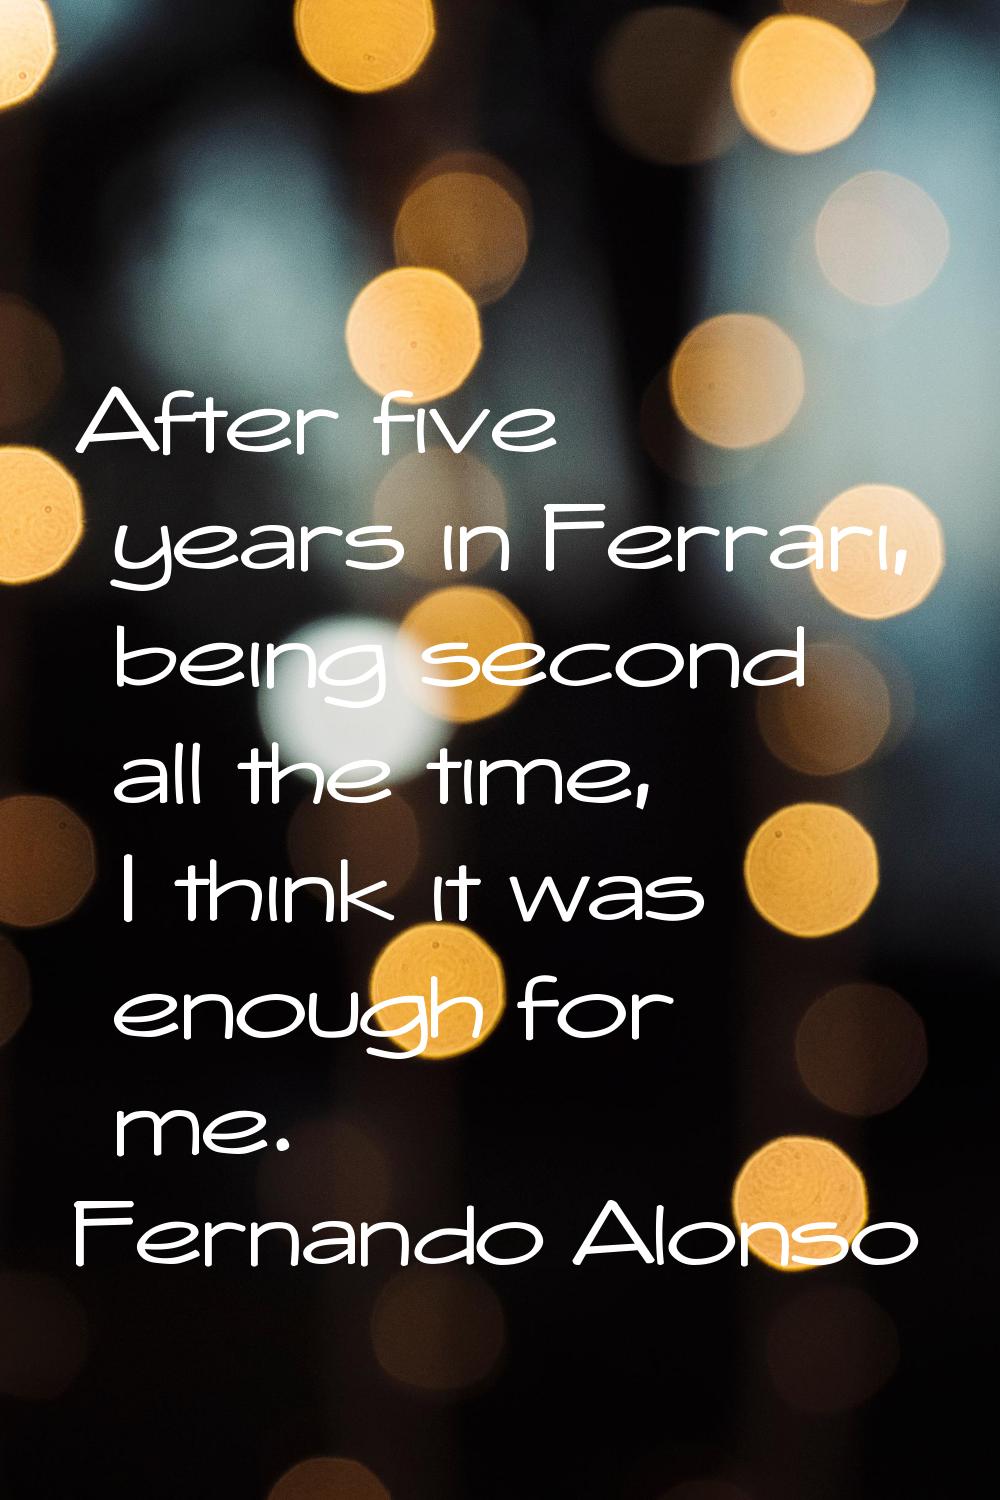 After five years in Ferrari, being second all the time, I think it was enough for me.